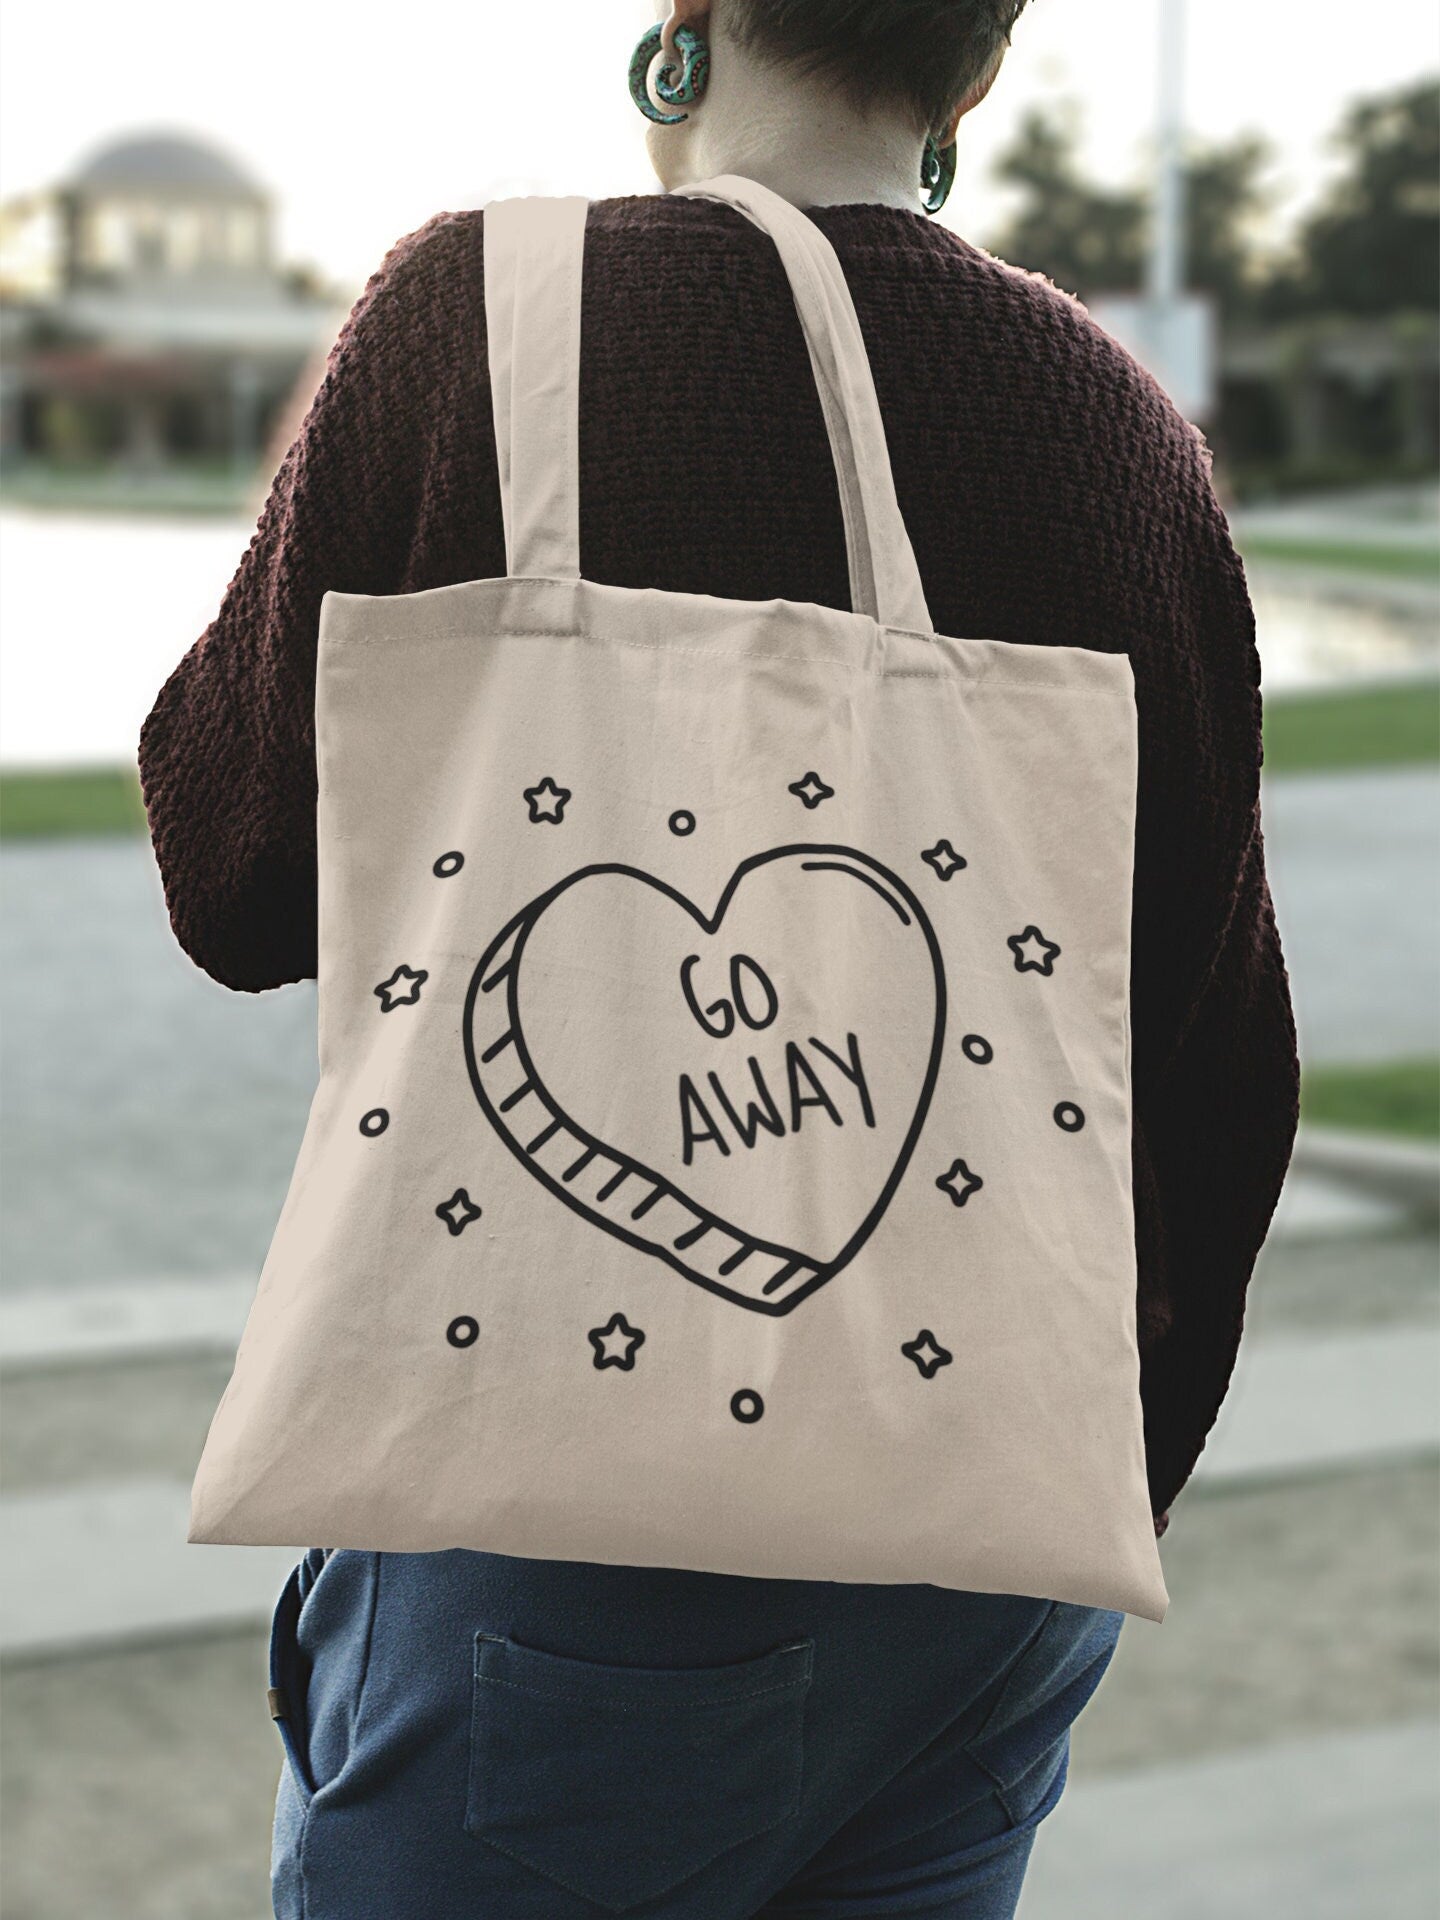 Go Away Tote Bag | Funny Gifts - Canvas Tote Bag - Reusable Bags - Gift for Friends - Friendship Gift - Best Friend